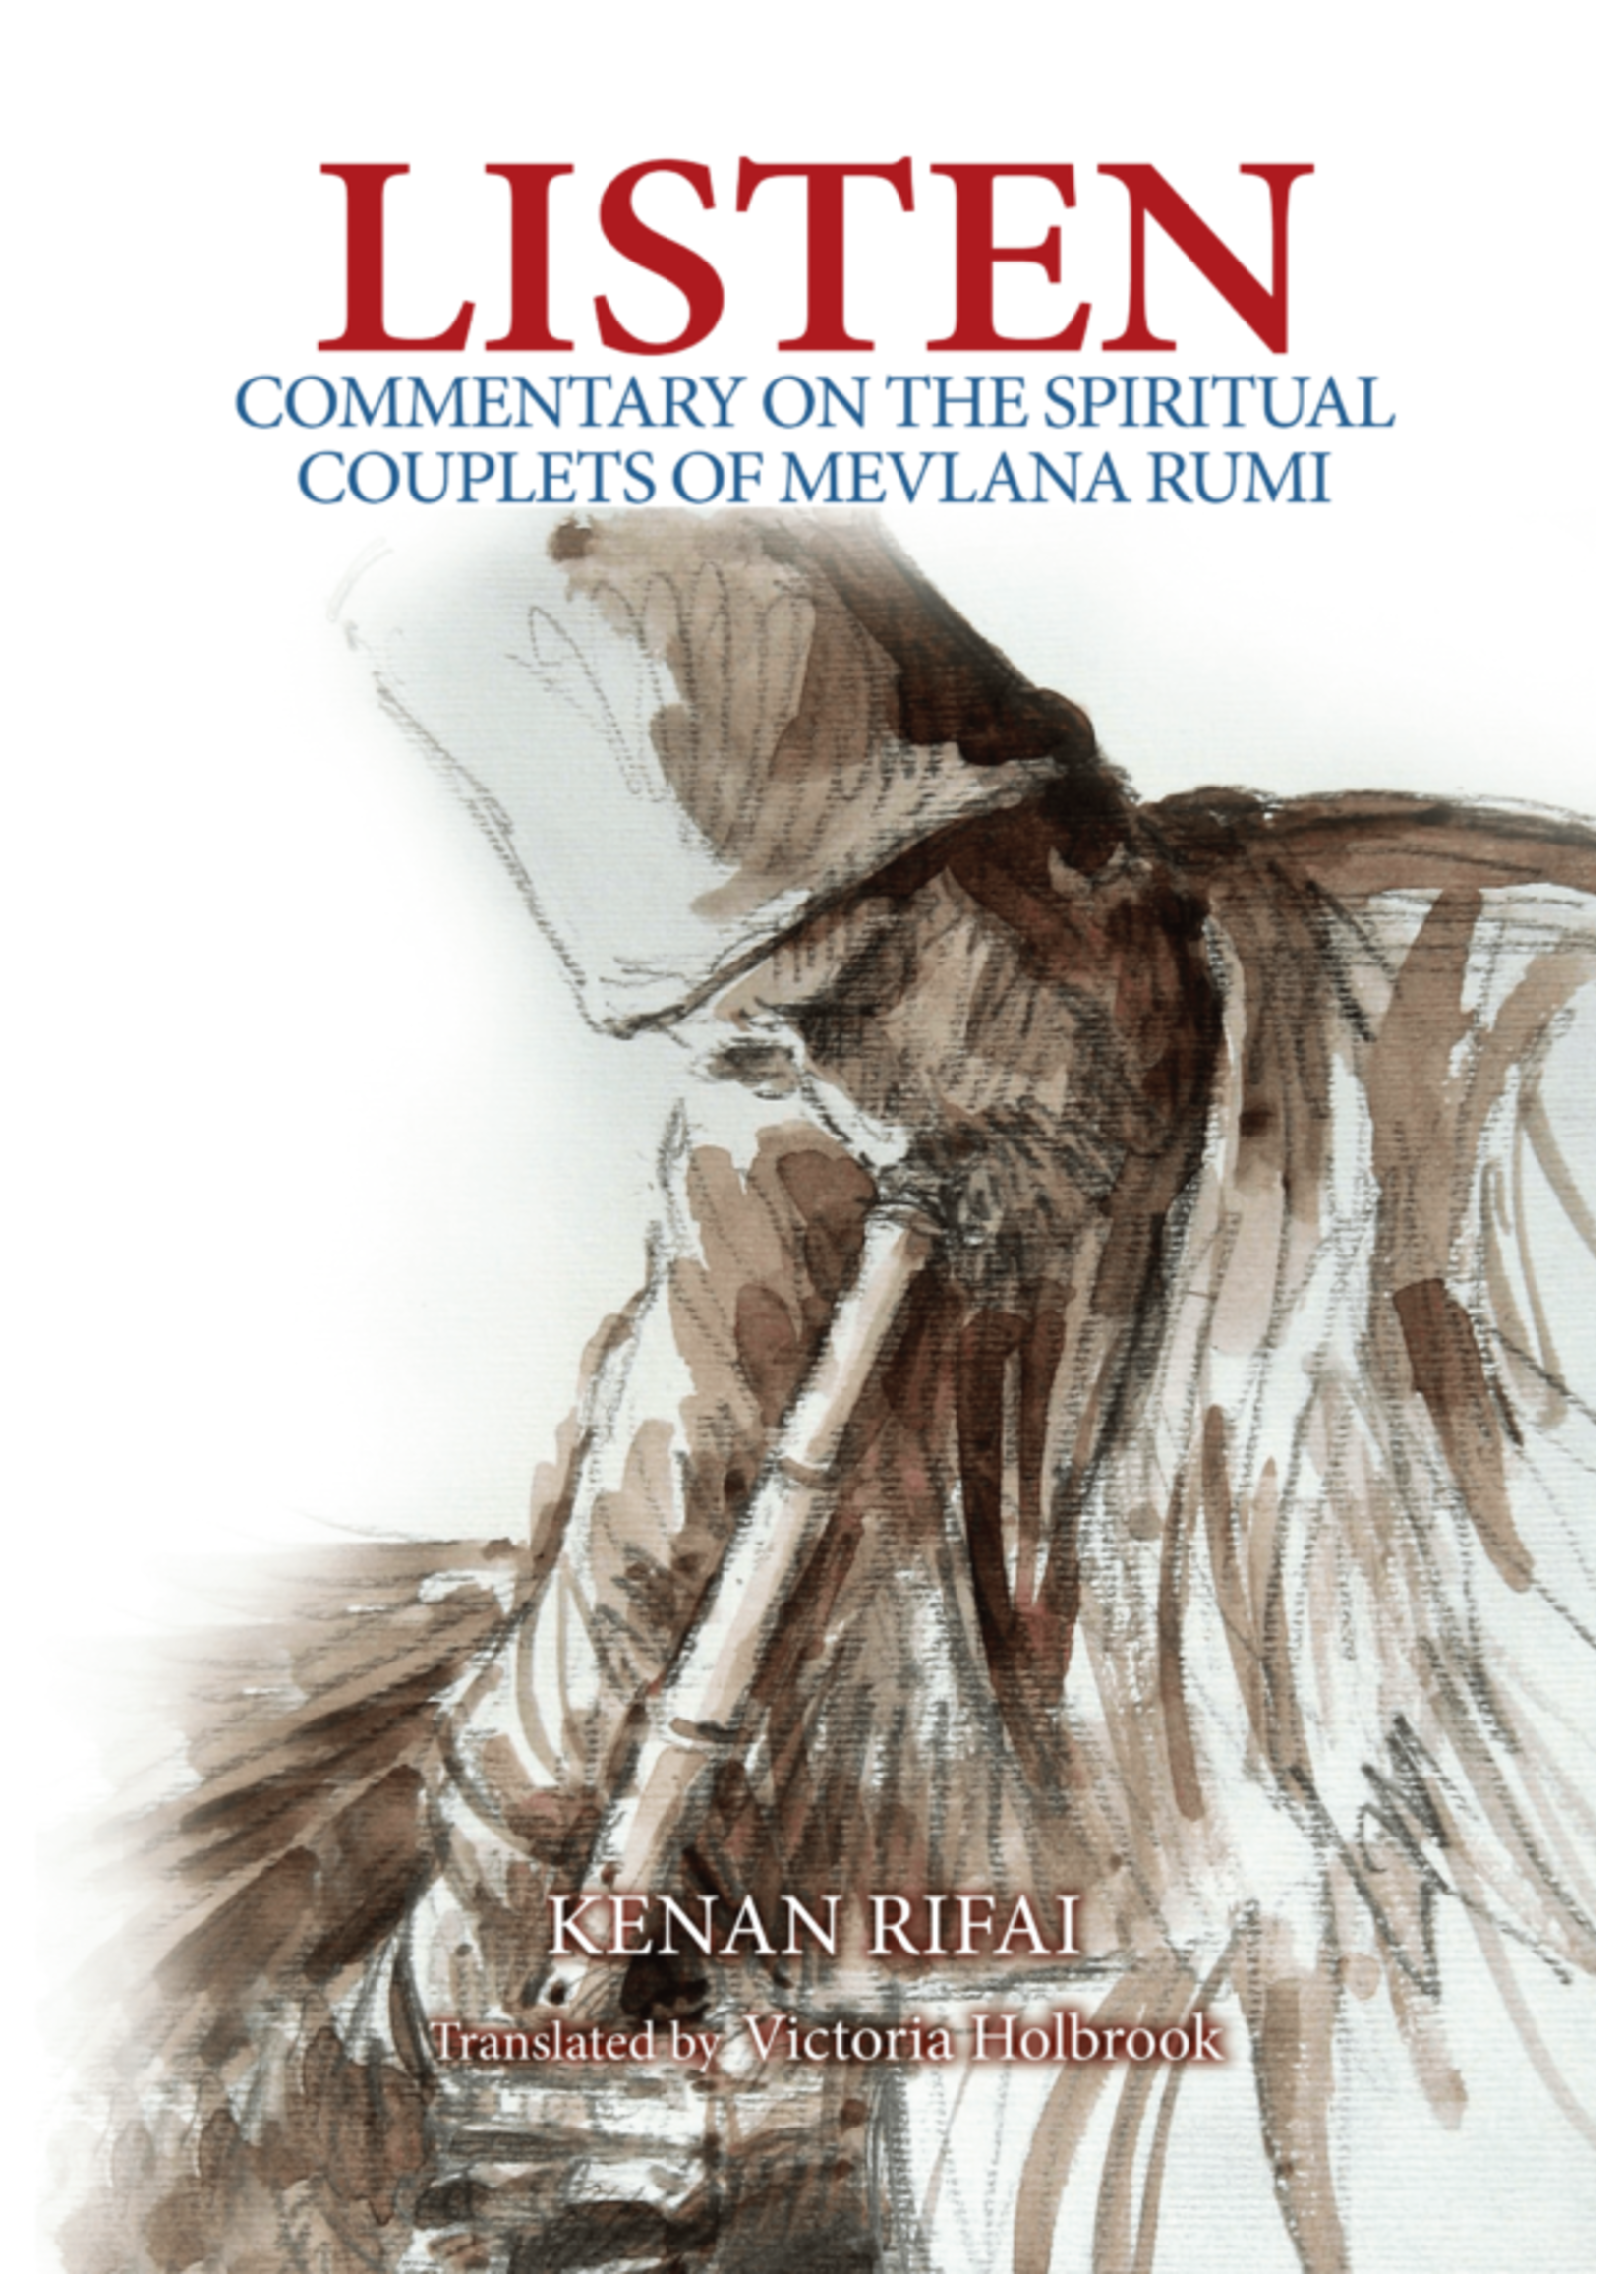 Listen: Commentary on the Spiritual Couplets of Mevlana Rumi